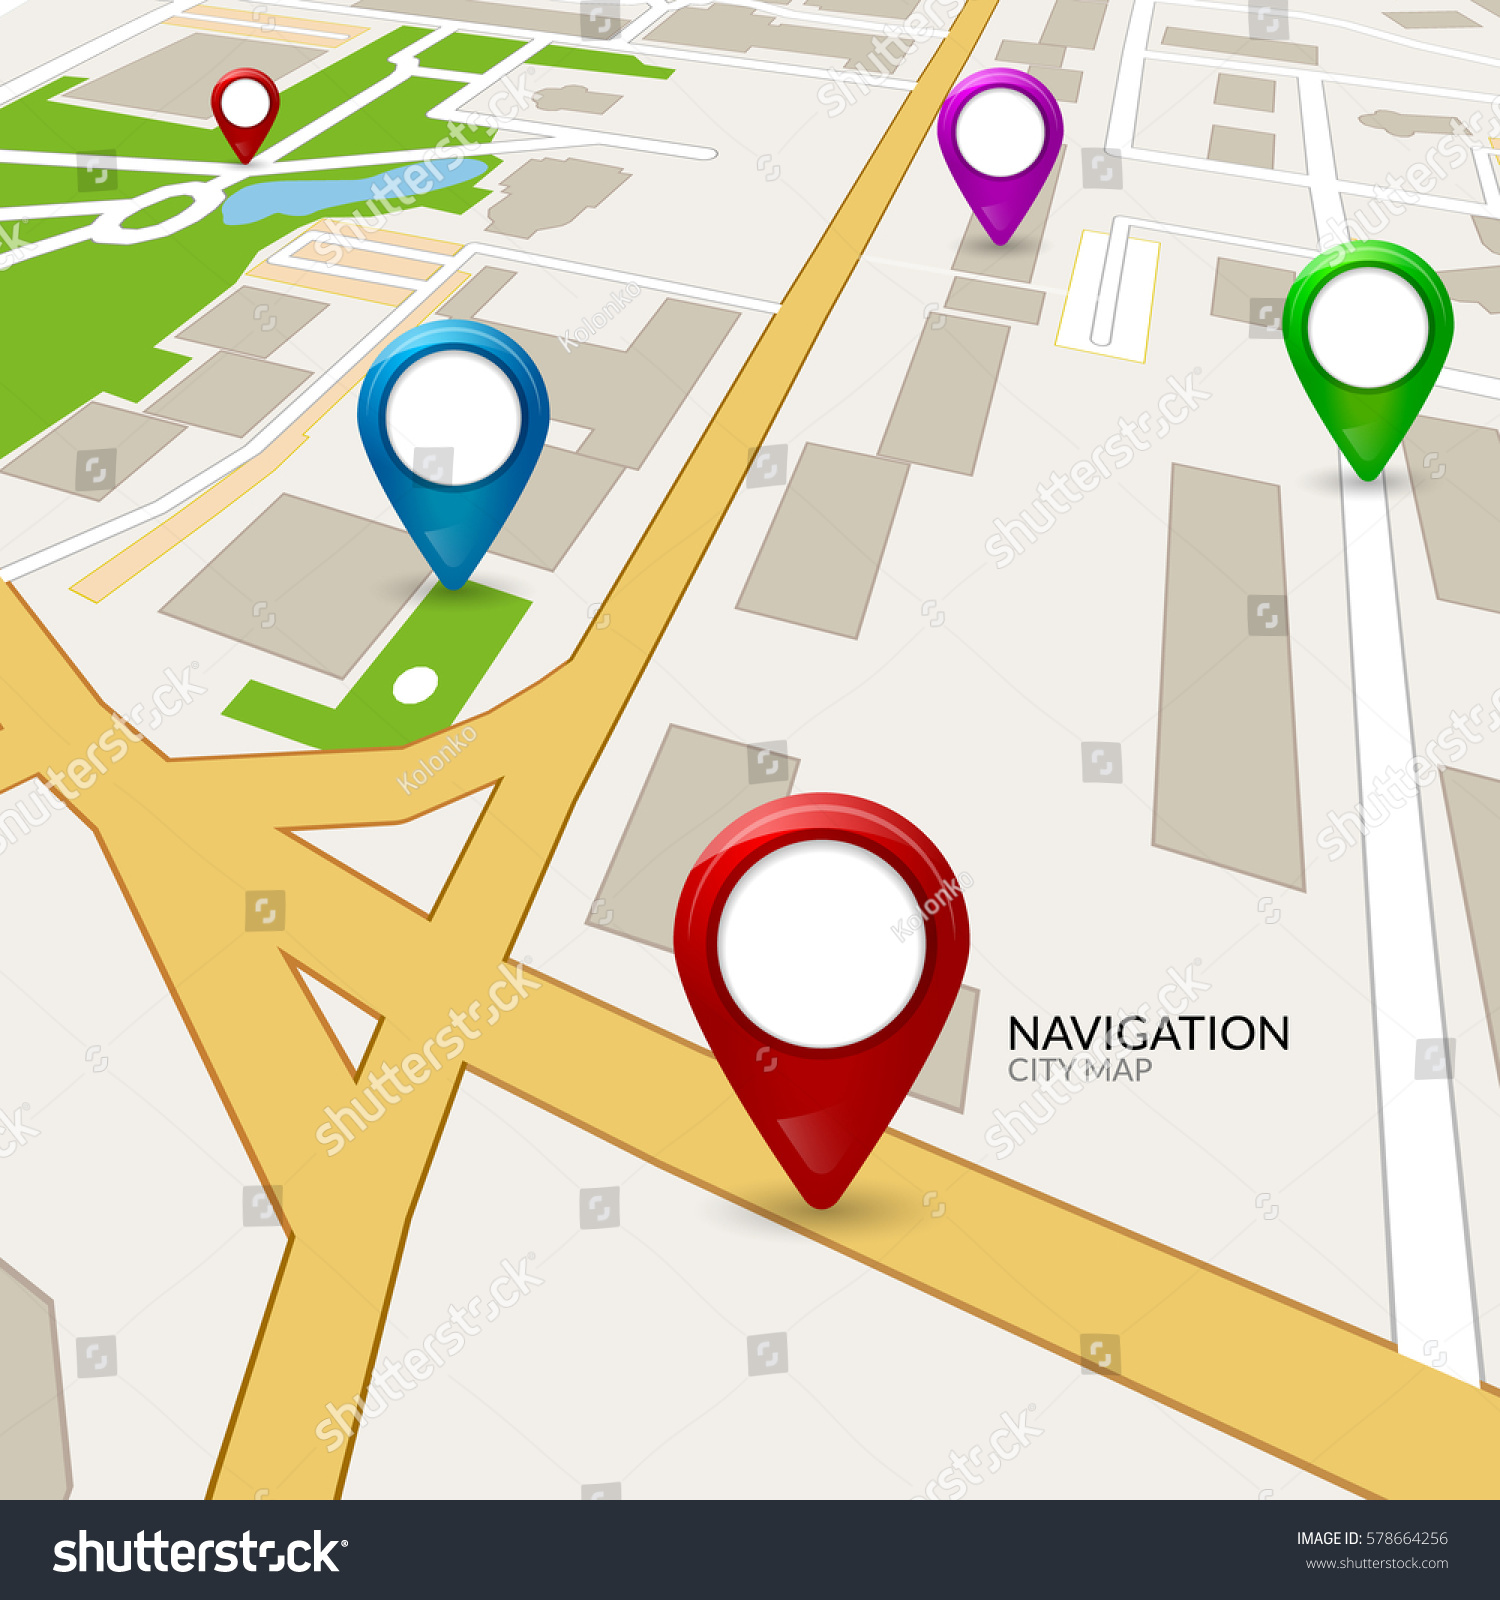 Vector gps map city. Street road navigation. GPS pin on map. Route direction illustration. City cartography #578664256